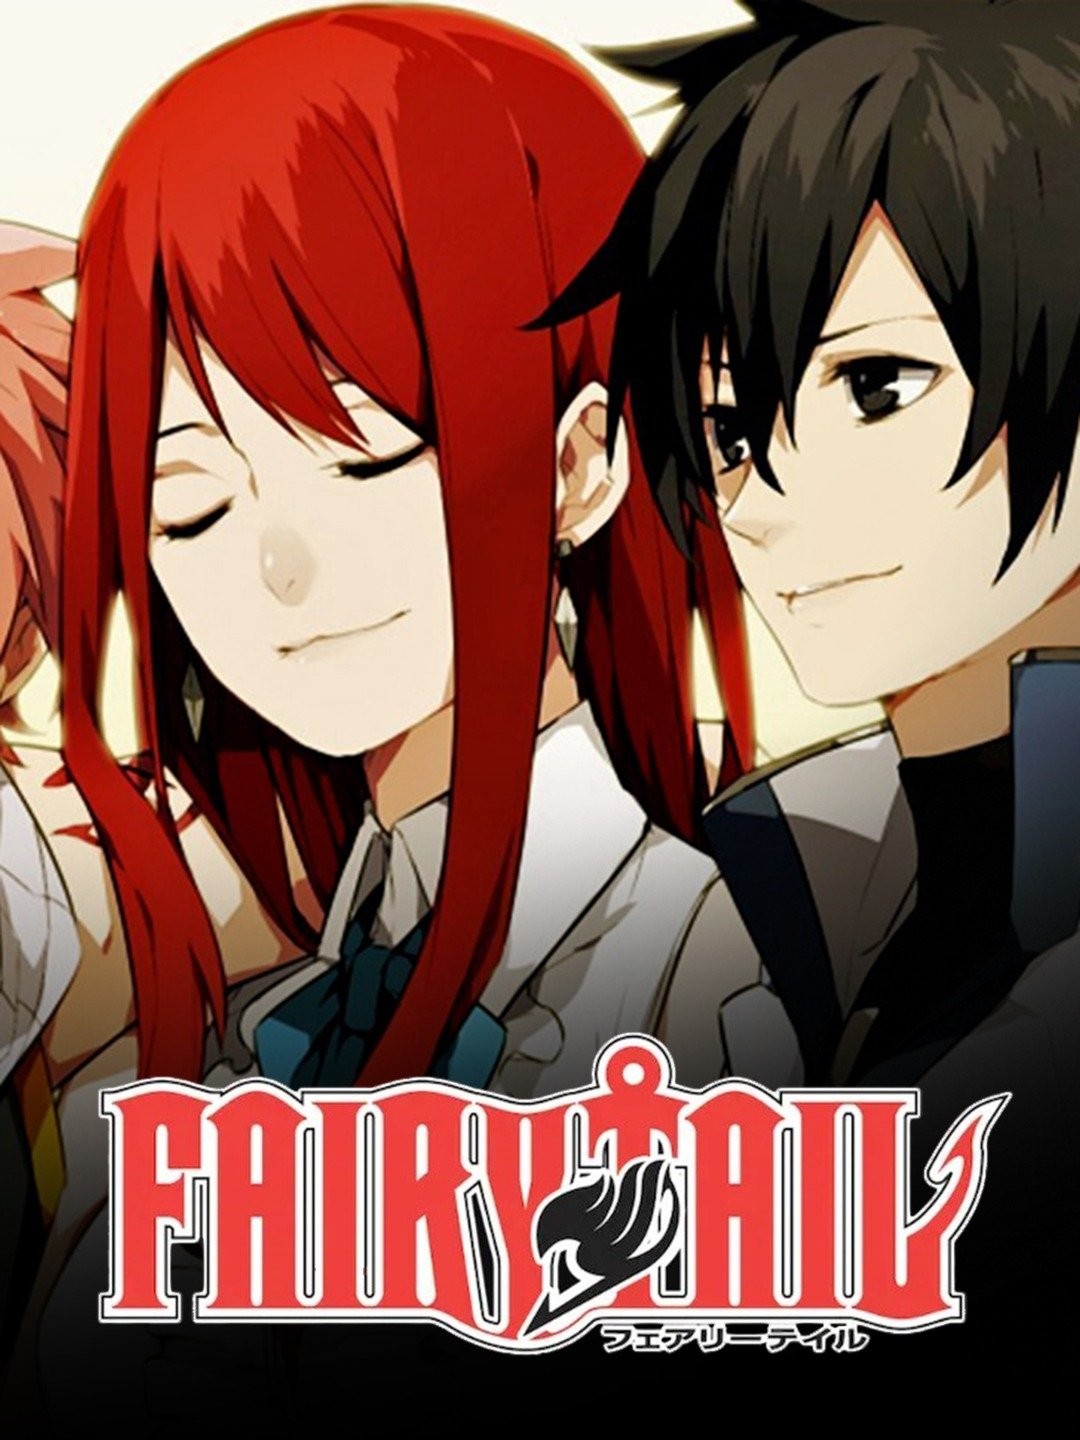 COMPLETE Fairy Tail Watch Order OFFICIAL